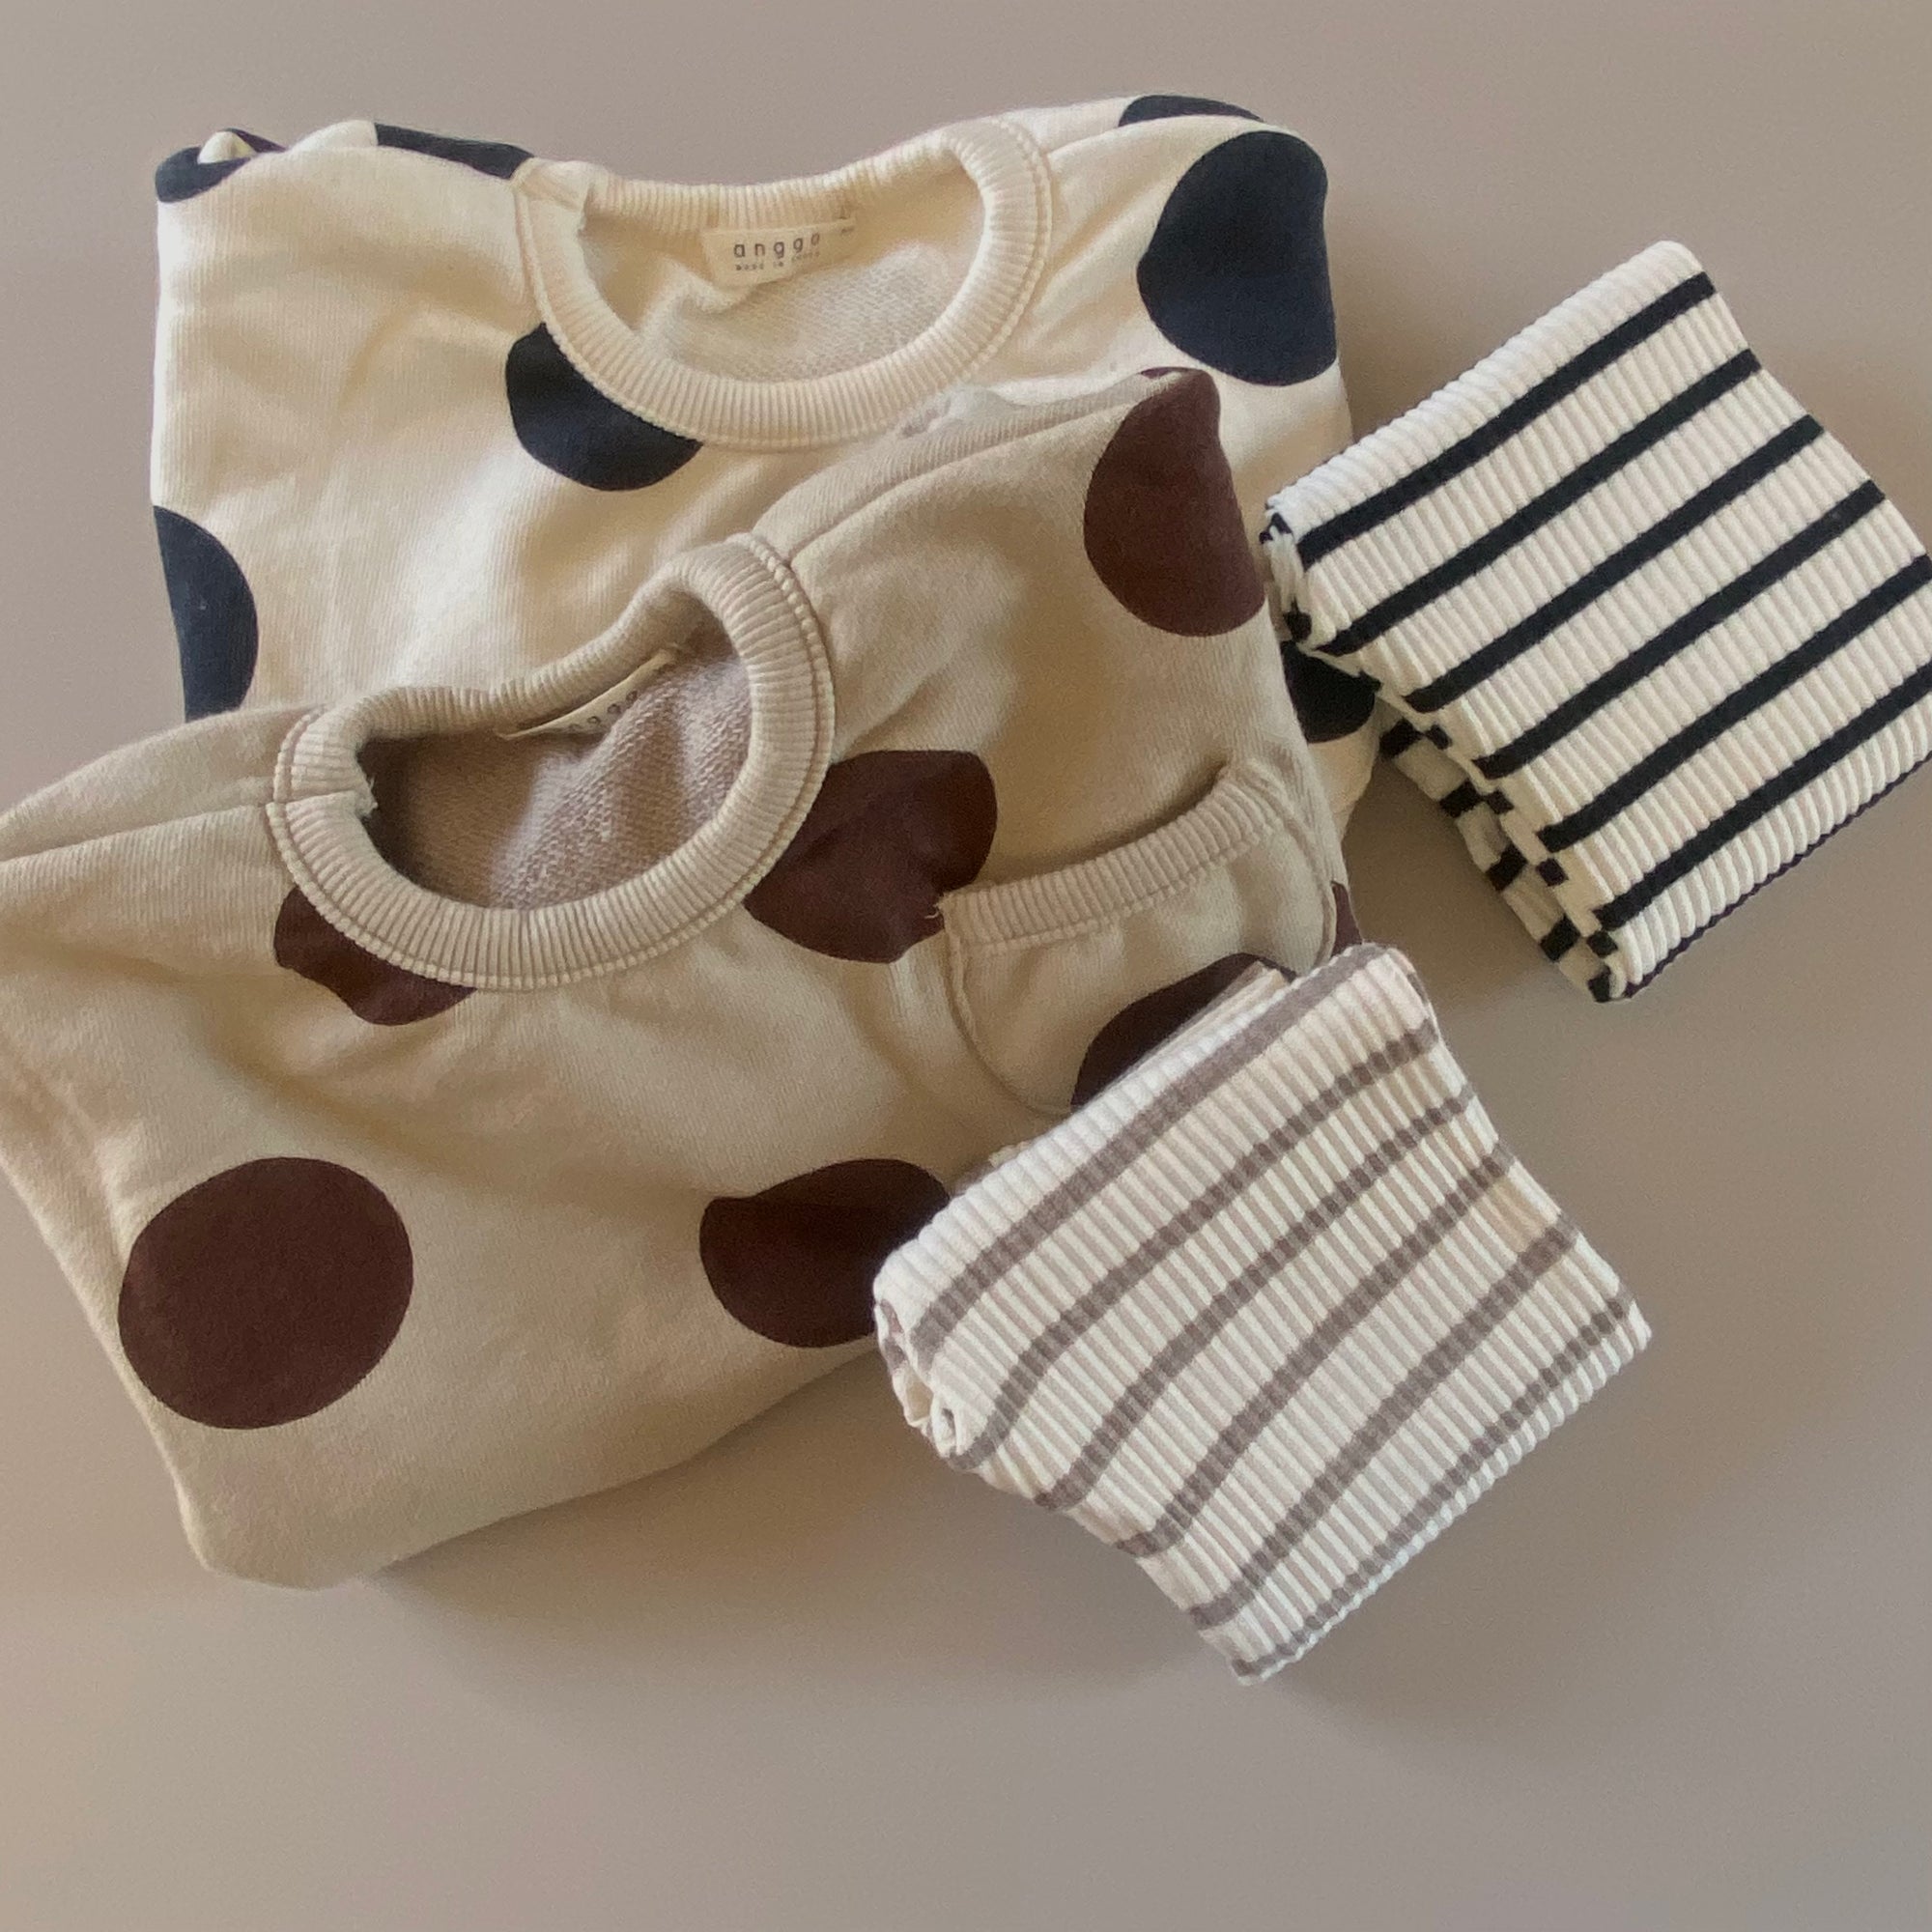 Stripe Leggings find Stylish Fashion for Little People- at Little Foxx Concept Store